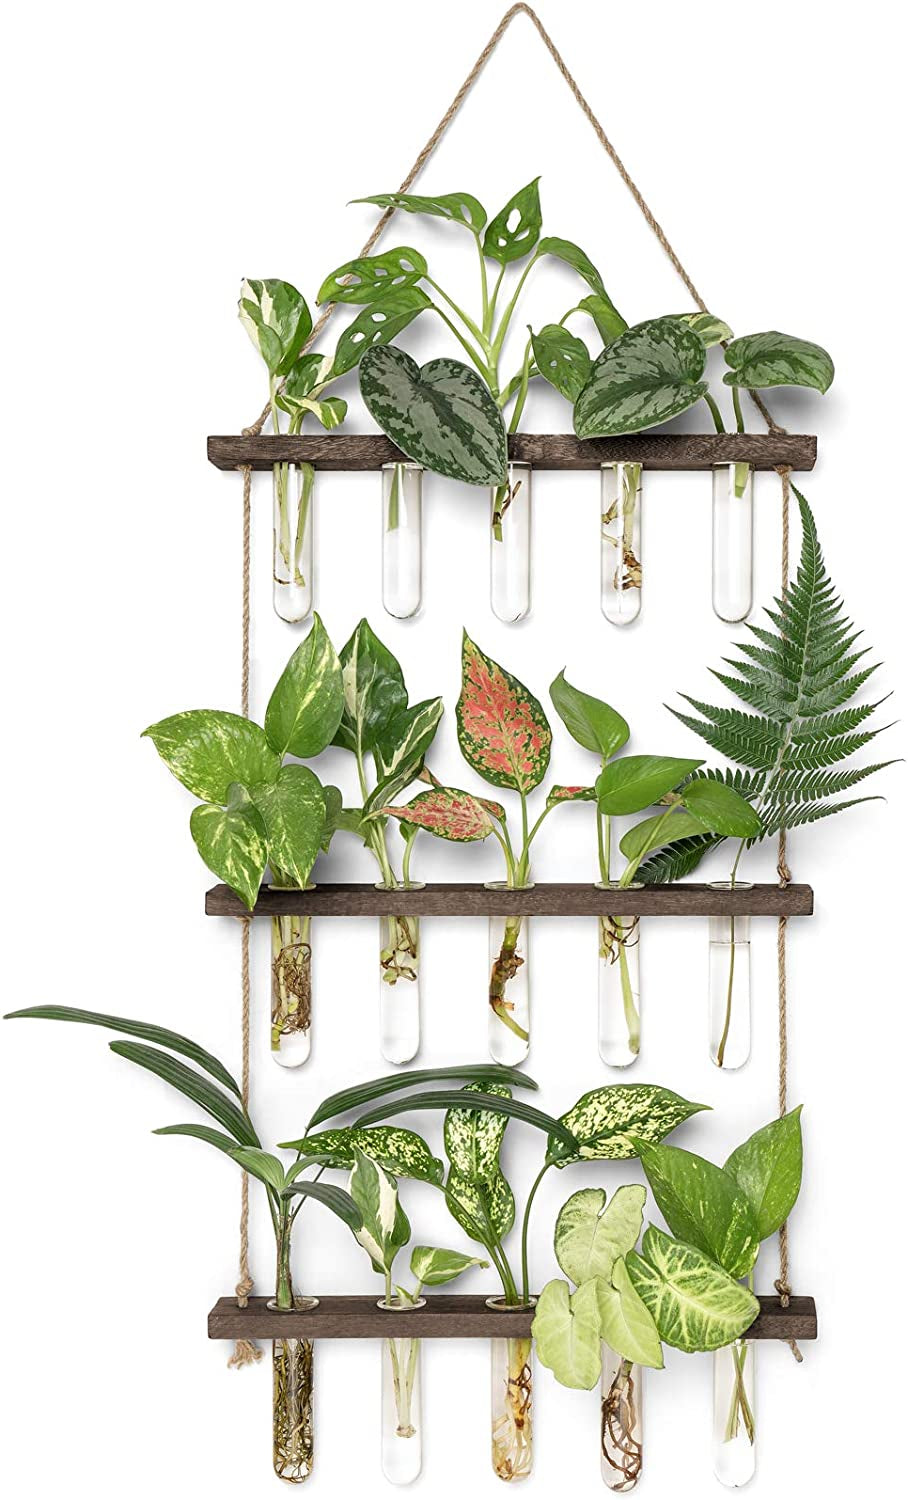 Plant Propagation Tubes, 3 Tiered Wall Hanging Terrarium with Wooden Stand Mini Test Tube Flower Vase Glass Planter Stations for Hydroponic Cutting Home Garden Office Decor Plant Lover Gift